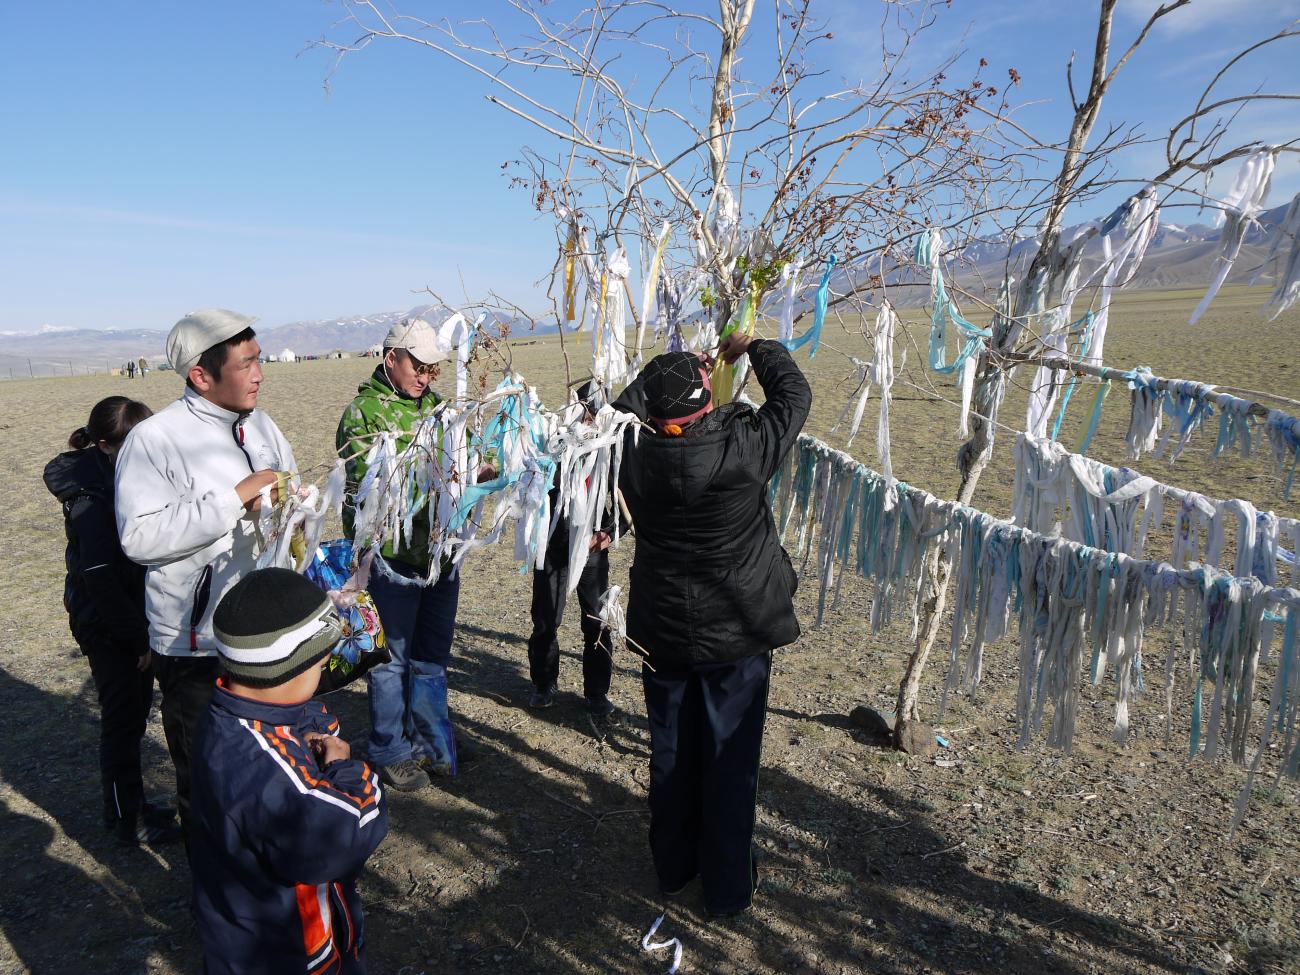 Russia/China: Pipeline Threatens Sacred Highlands